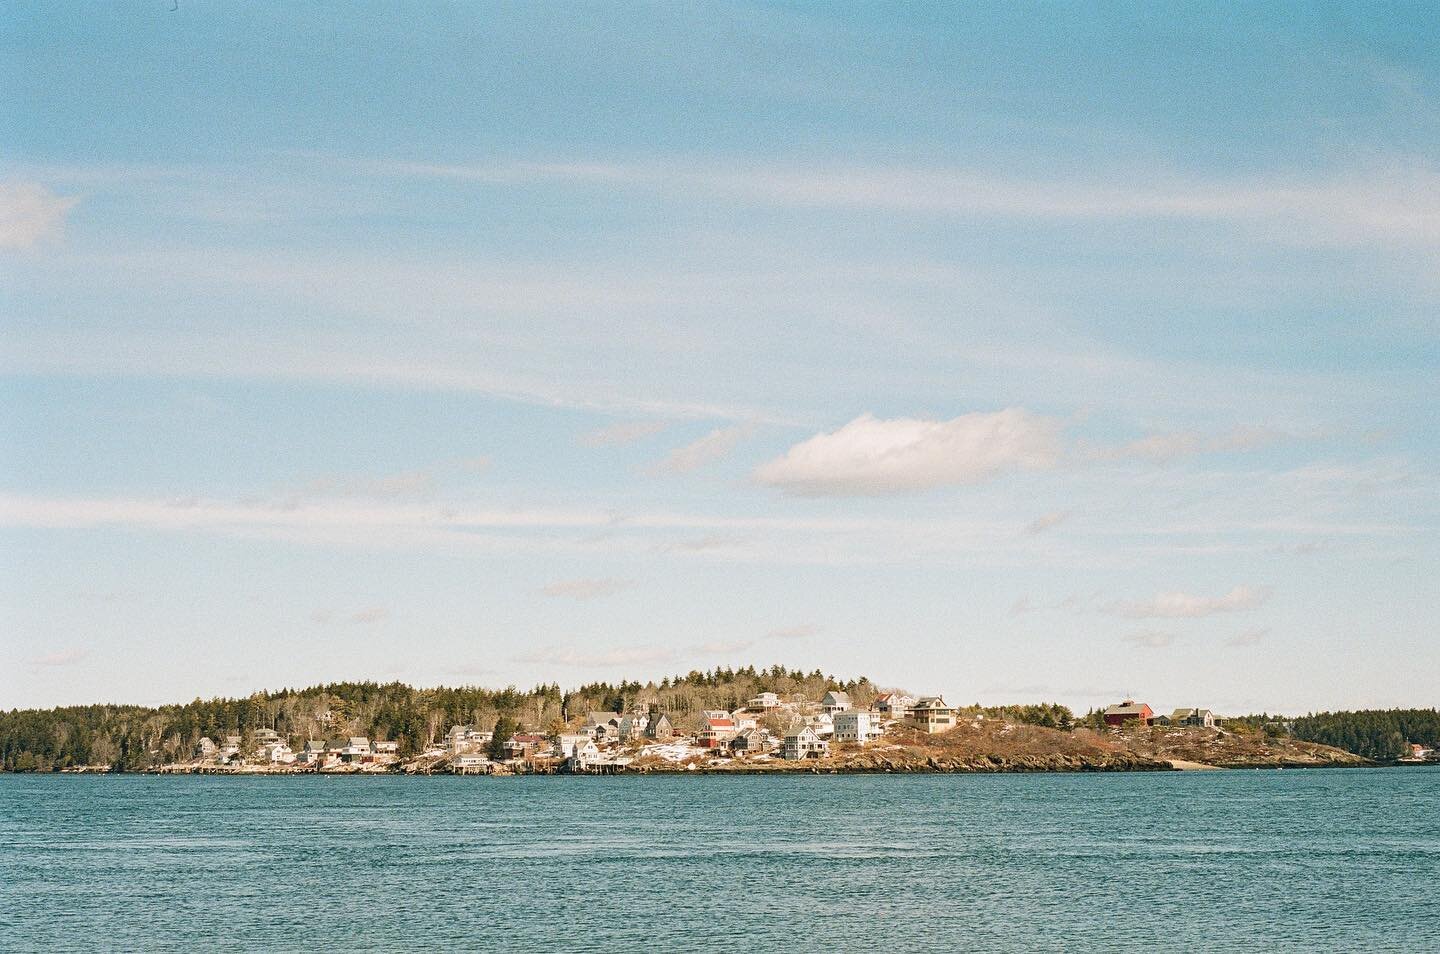 a sunny day in maine . 
.
.
.
at some point i'll stop posting film scans. but not today.